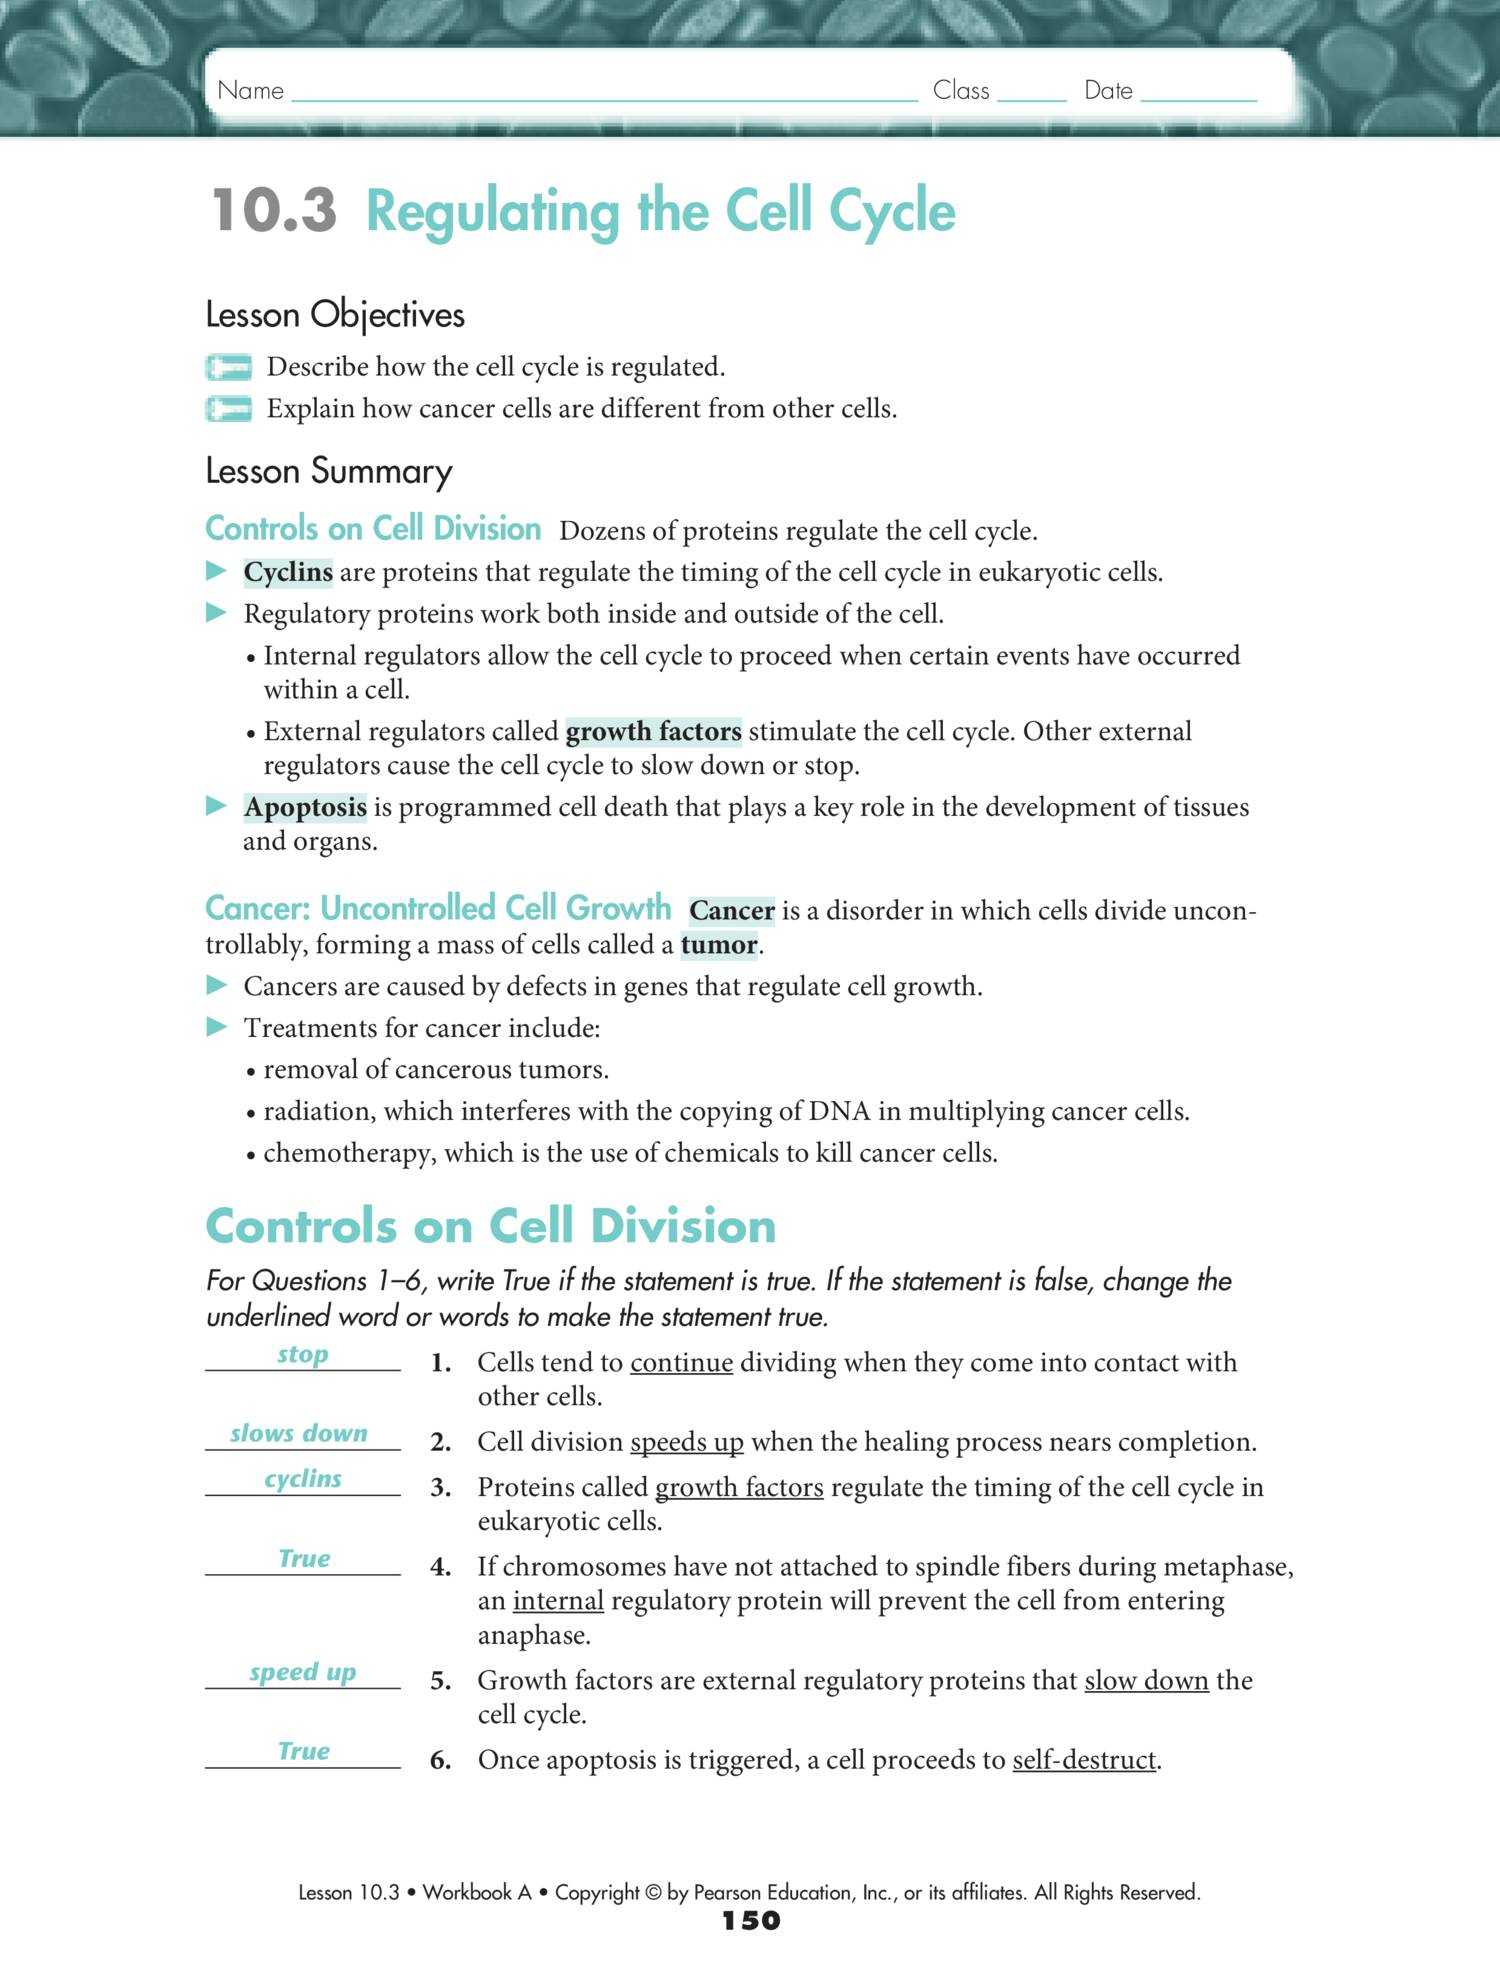 Cell Cycle and Mitosis Worksheet Also the Cell Cycle Worksheet Answers Aff1e8312a9b Battk